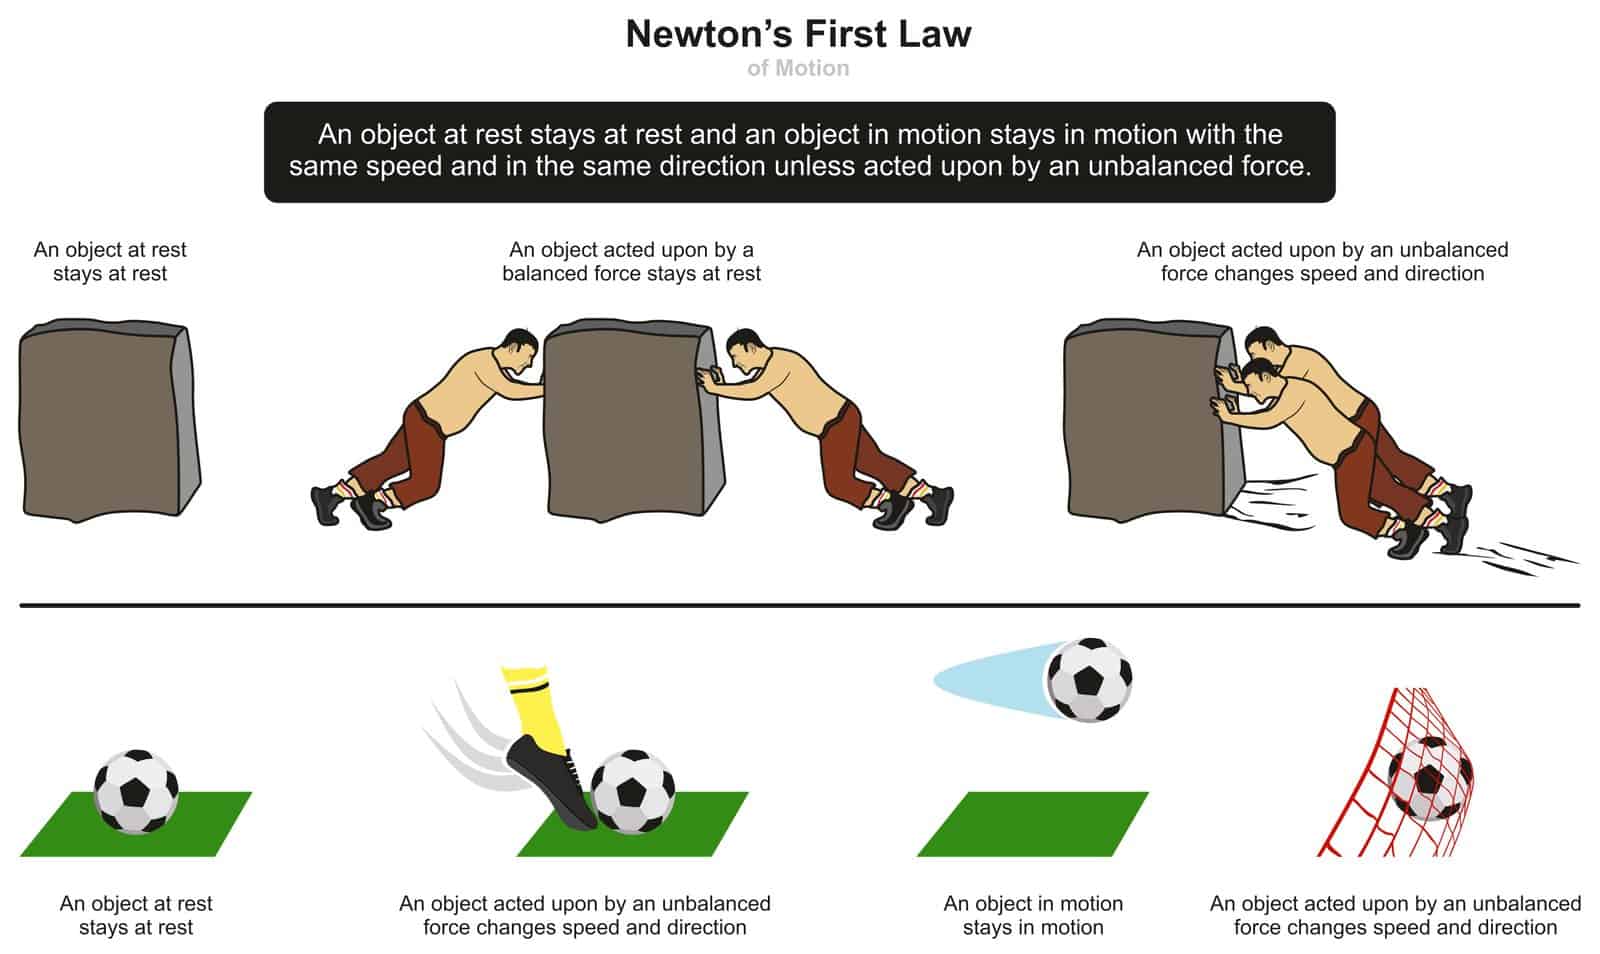 Newton's laws of motion